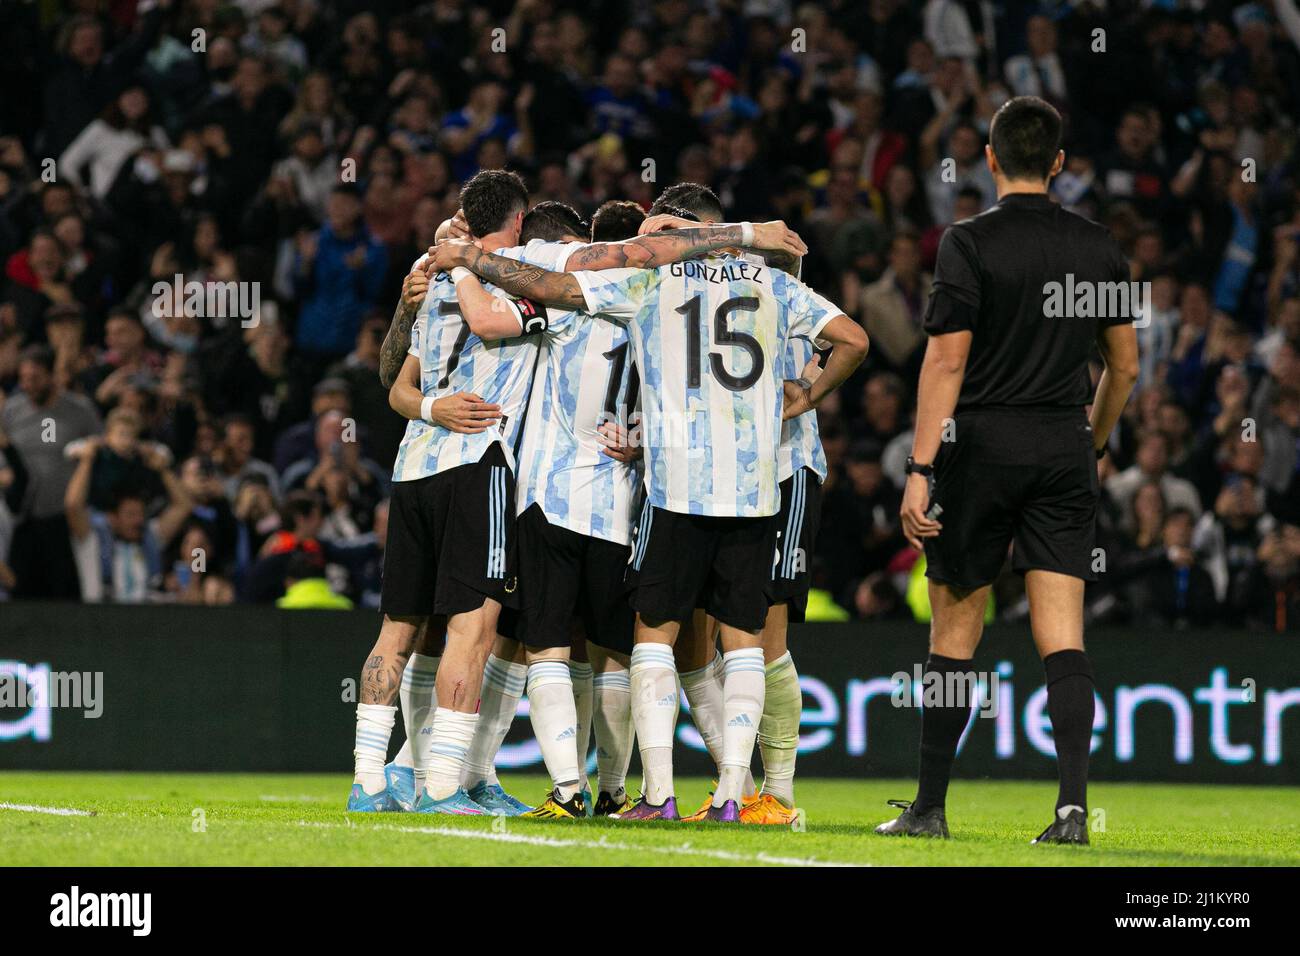 BUENOS AIRES, ARGENTINA - MARCH 25: Nicolás González of Argentina celebrates after scoring a goal during the Fifa World Cup Qualifiers - Conmebol match between Argentina and Venezuela at La Bombonera Stadium on March 25, 2022 in Buenos Aires, Argentina. (Photo by Florencia Tan Jun/Pximages) Stock Photo